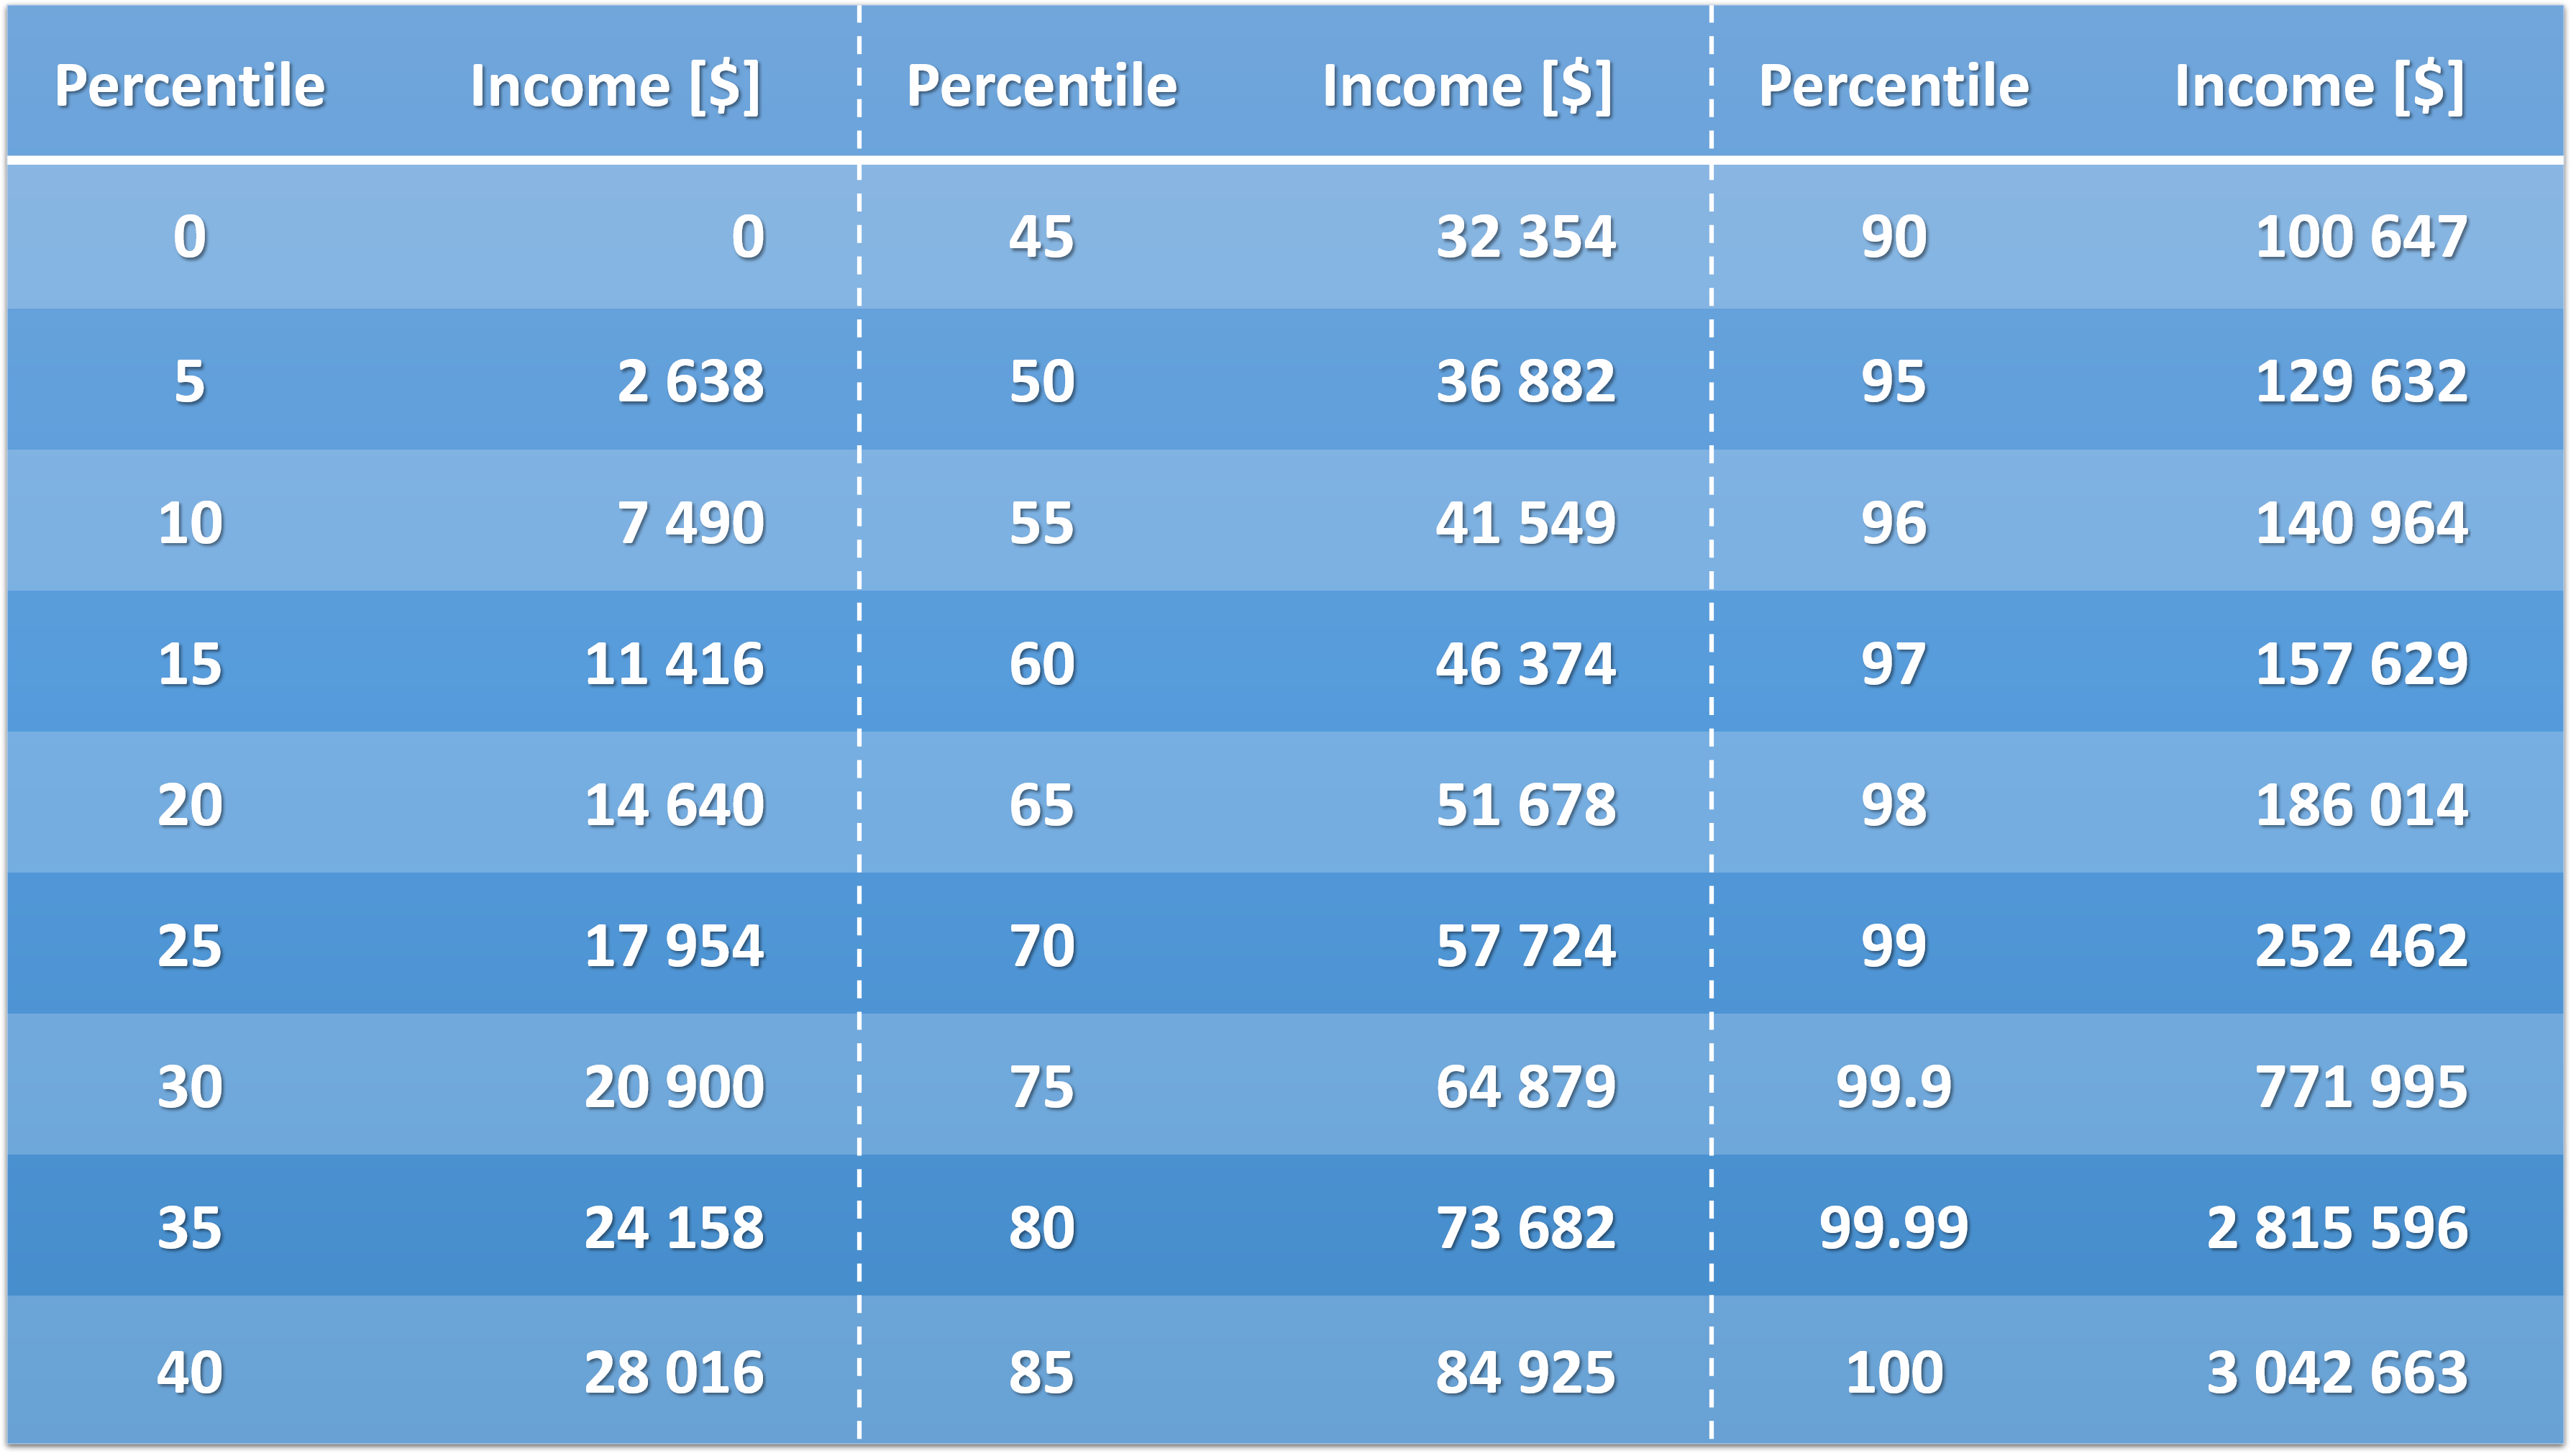 Table 2: Canadian income distribution. Data from Statistics Canada and Global News while adjusting for inflation to 2019 CAD using the Bank of Canada Inflation Calculator.